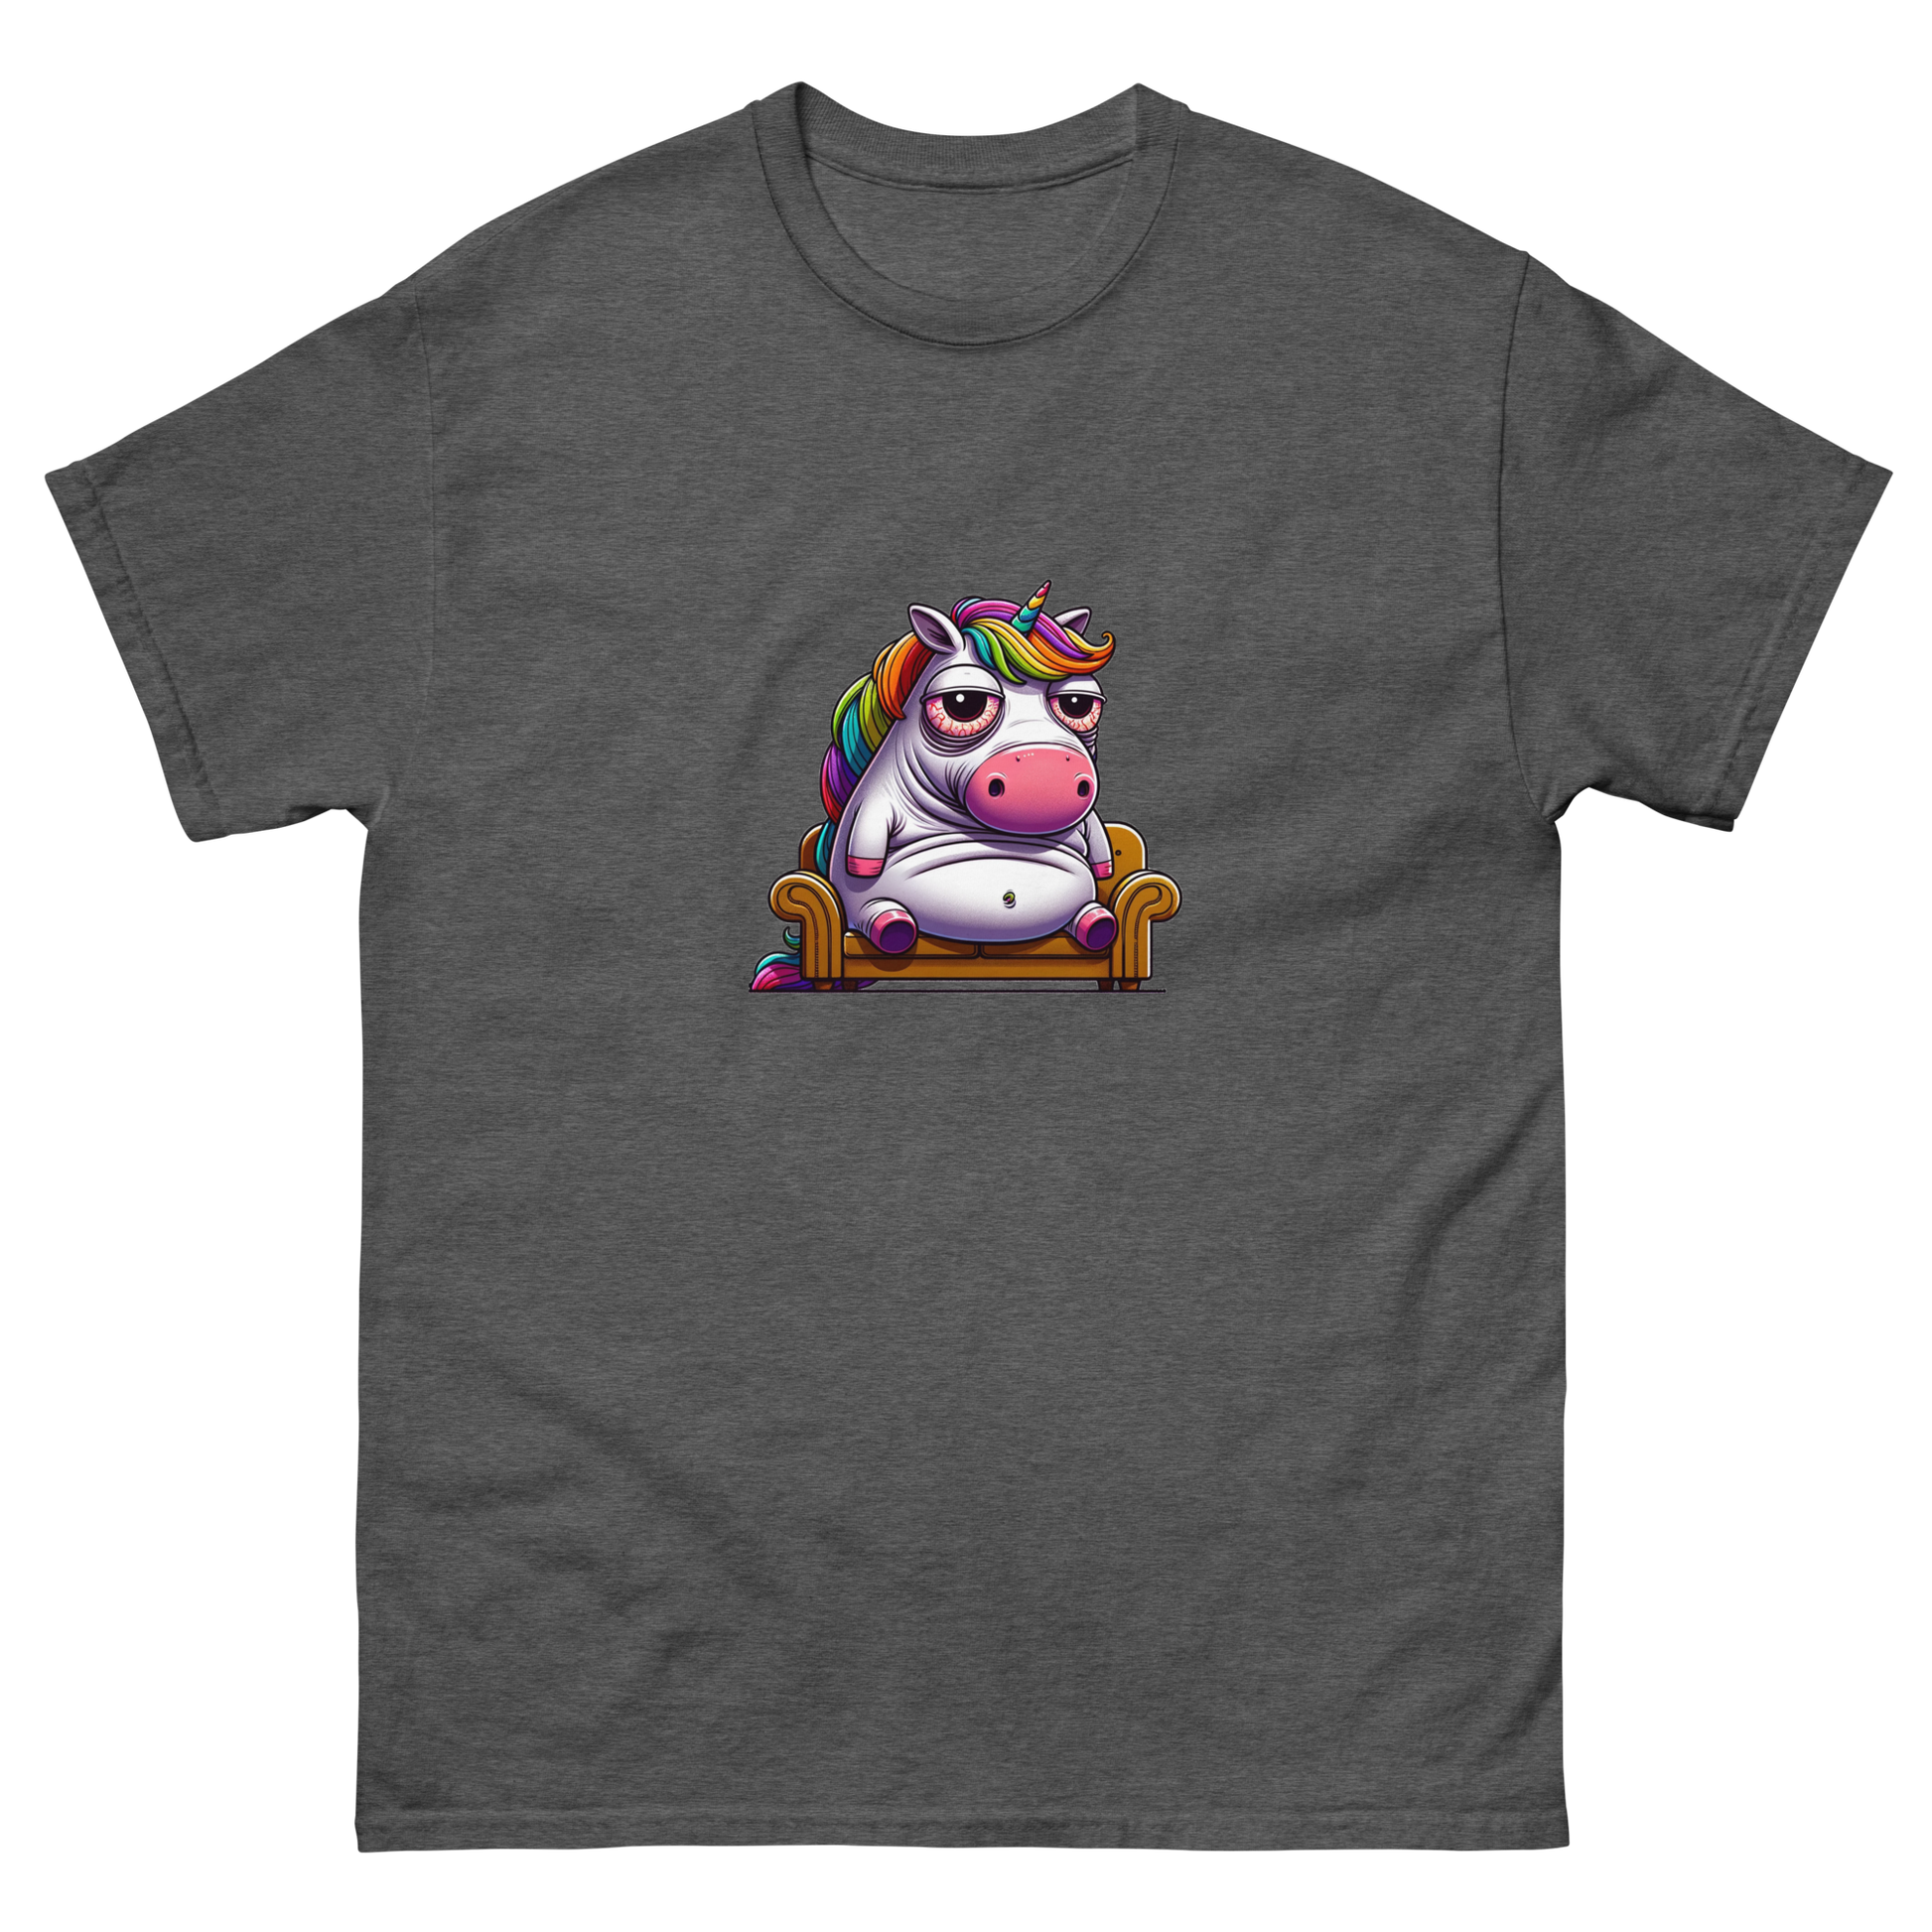 Vibrantly colored t-shirt featuring a whimsical unicorn cartoon, lounging with a relaxed, carefree attitude, enhanced by a rainbow of hues for an eye-catching look. Ideal for those who love to combine humor with a splash of color in their wardrobe